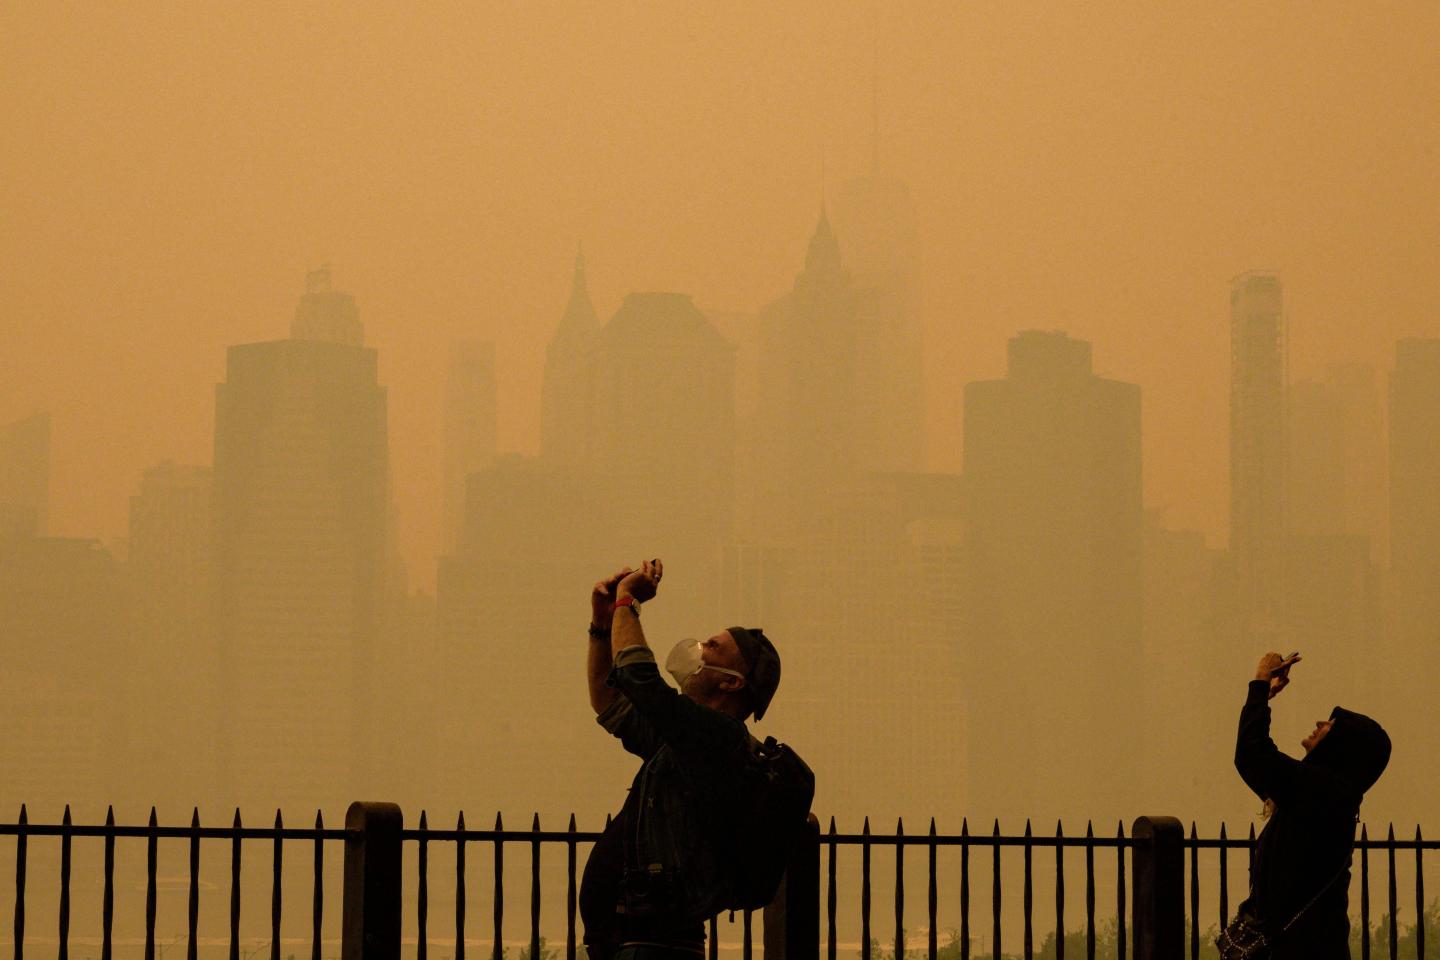 People take pictures in the foreground with an almost blocked out New York skyline in the background from deep orange haze from wildfire smoke